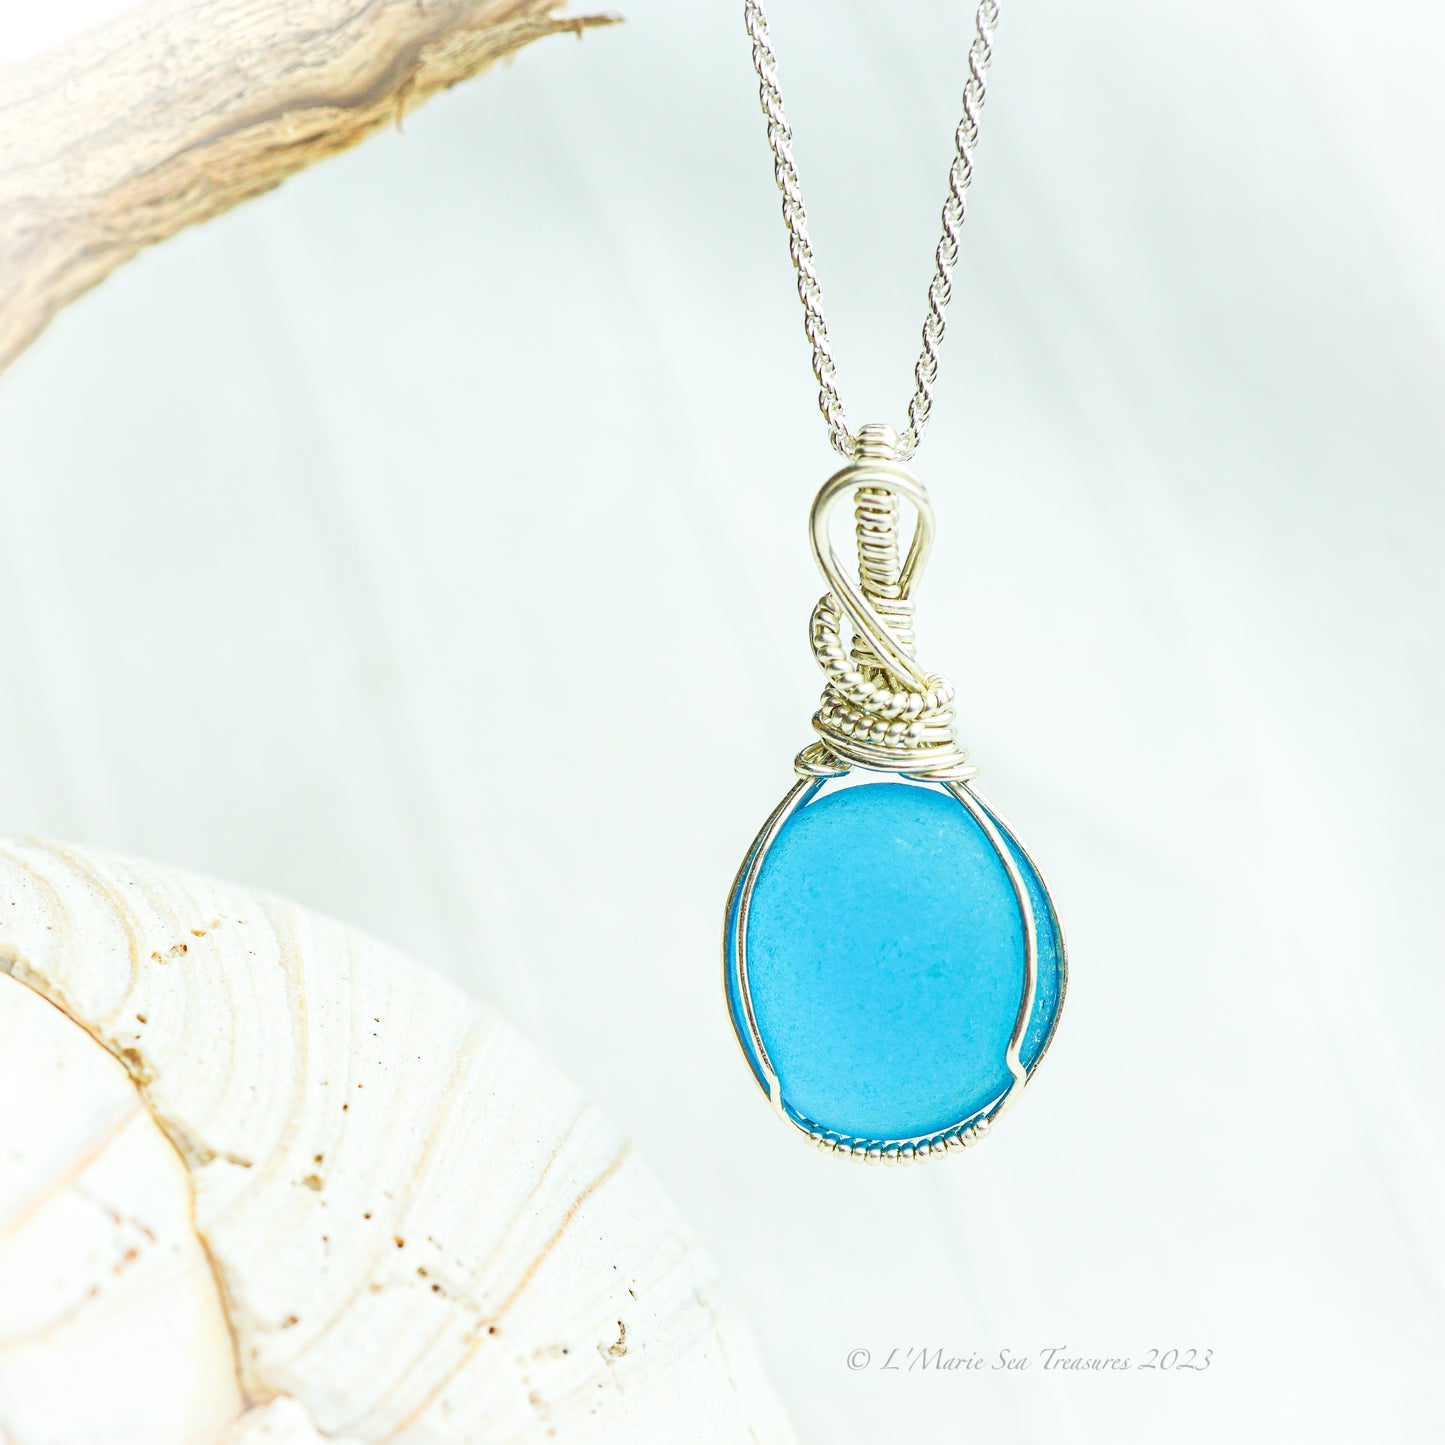 "Turquoise Stunner" Rare Sea Glass Necklace